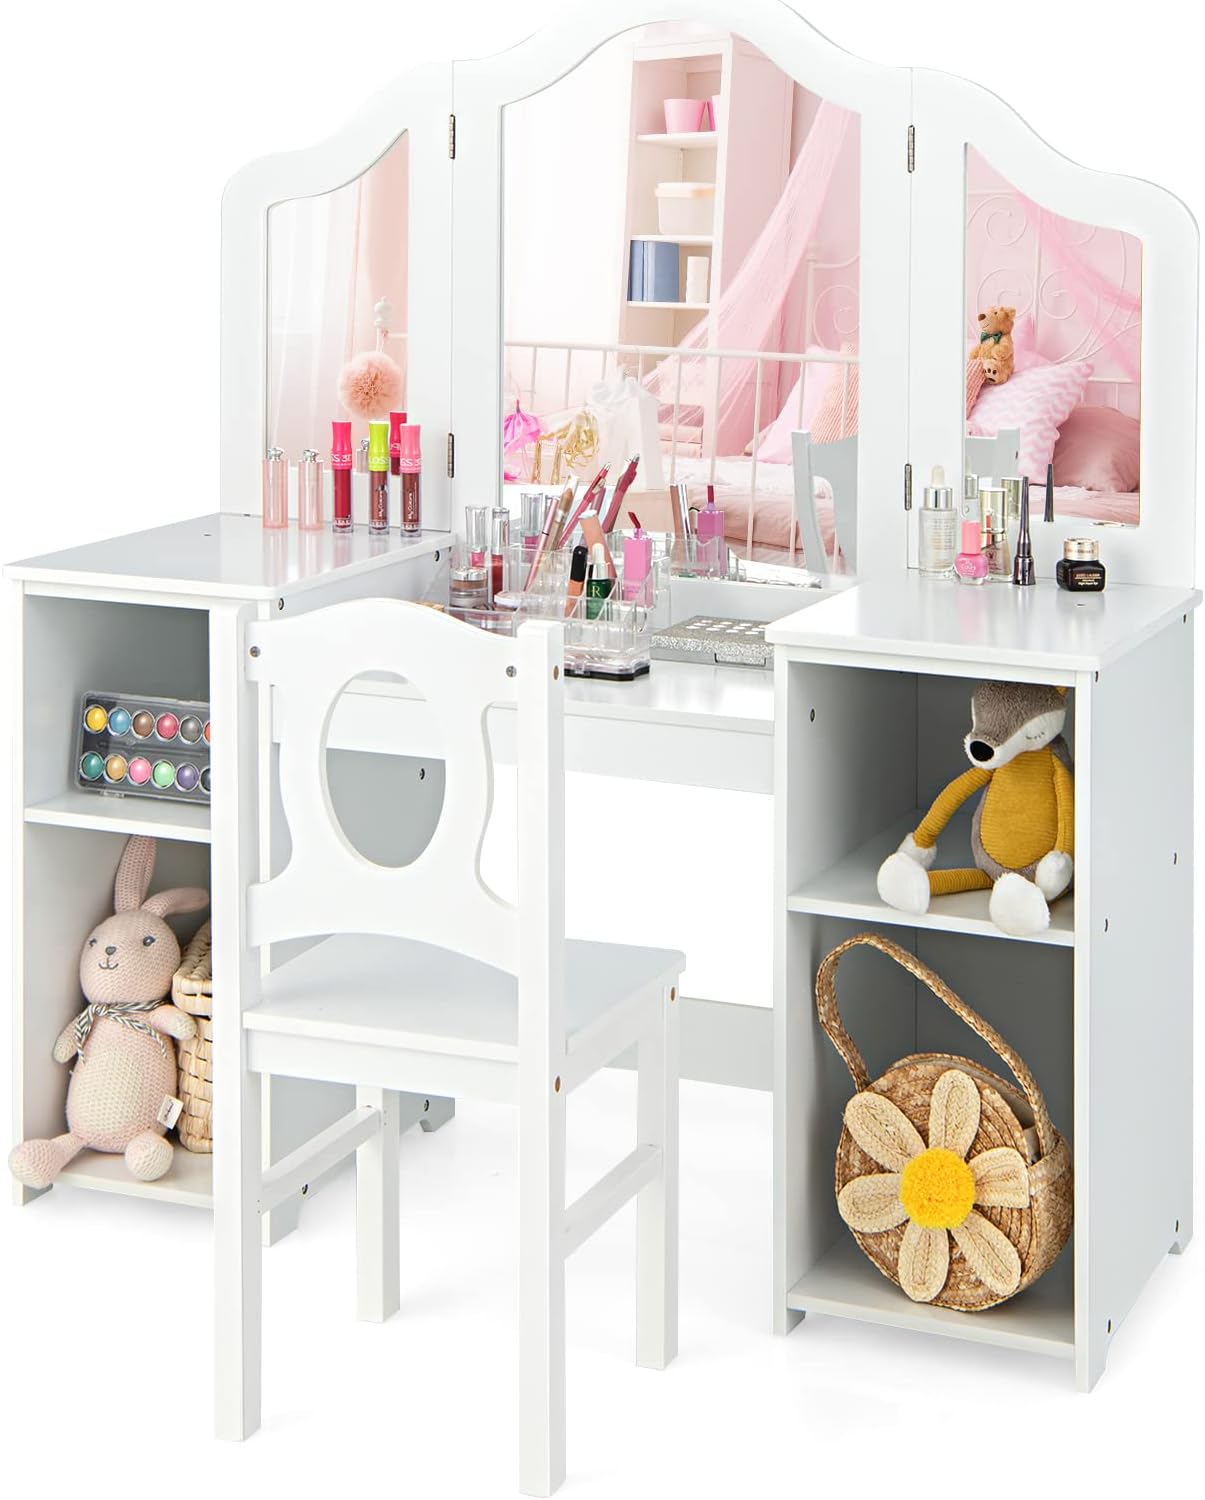 INFANS Kids Vanity, 2 in 1 Princess Makeup Desk & Chair Set with Tri-Folding Detachable Mirror, Large Storage Shelves, Wooden Pretend Play Dressing Table for Girls